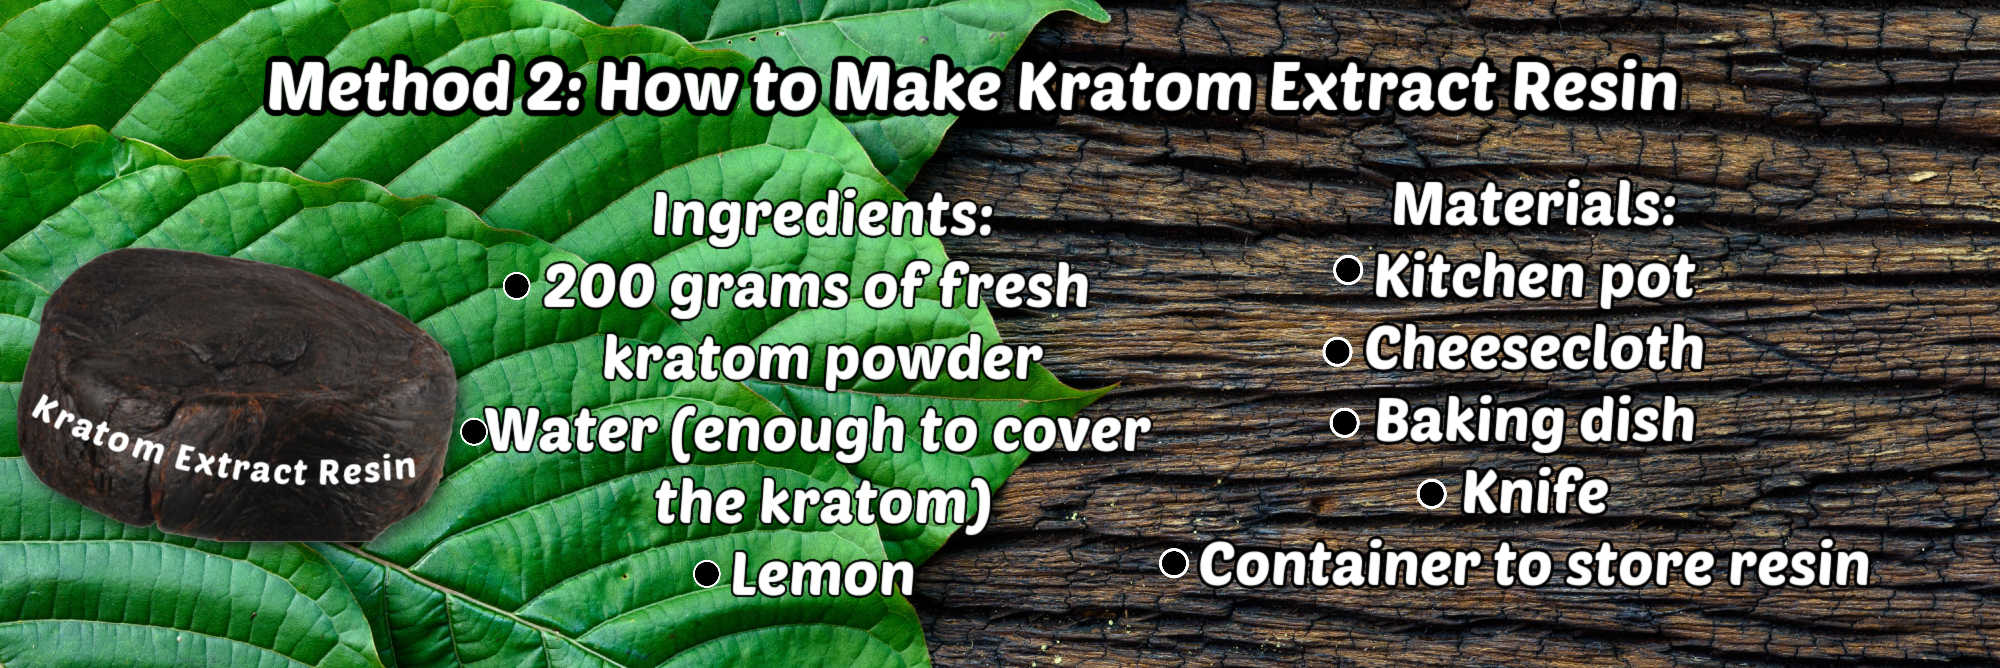 image of how to make kratom extract resin